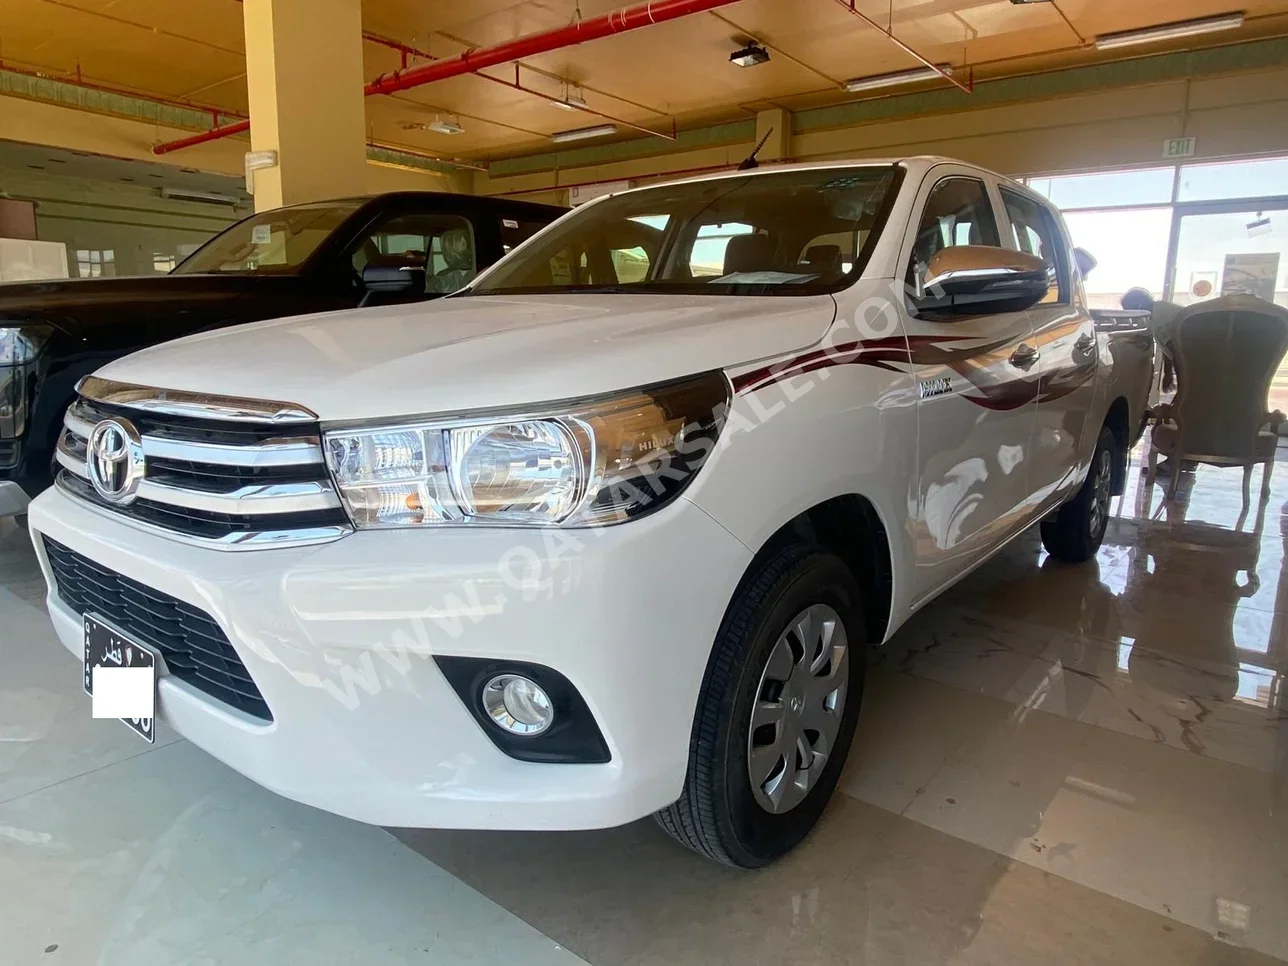 Toyota  Hilux  2022  Automatic  17,000 Km  4 Cylinder  Rear Wheel Drive (RWD)  Pick Up  White  With Warranty